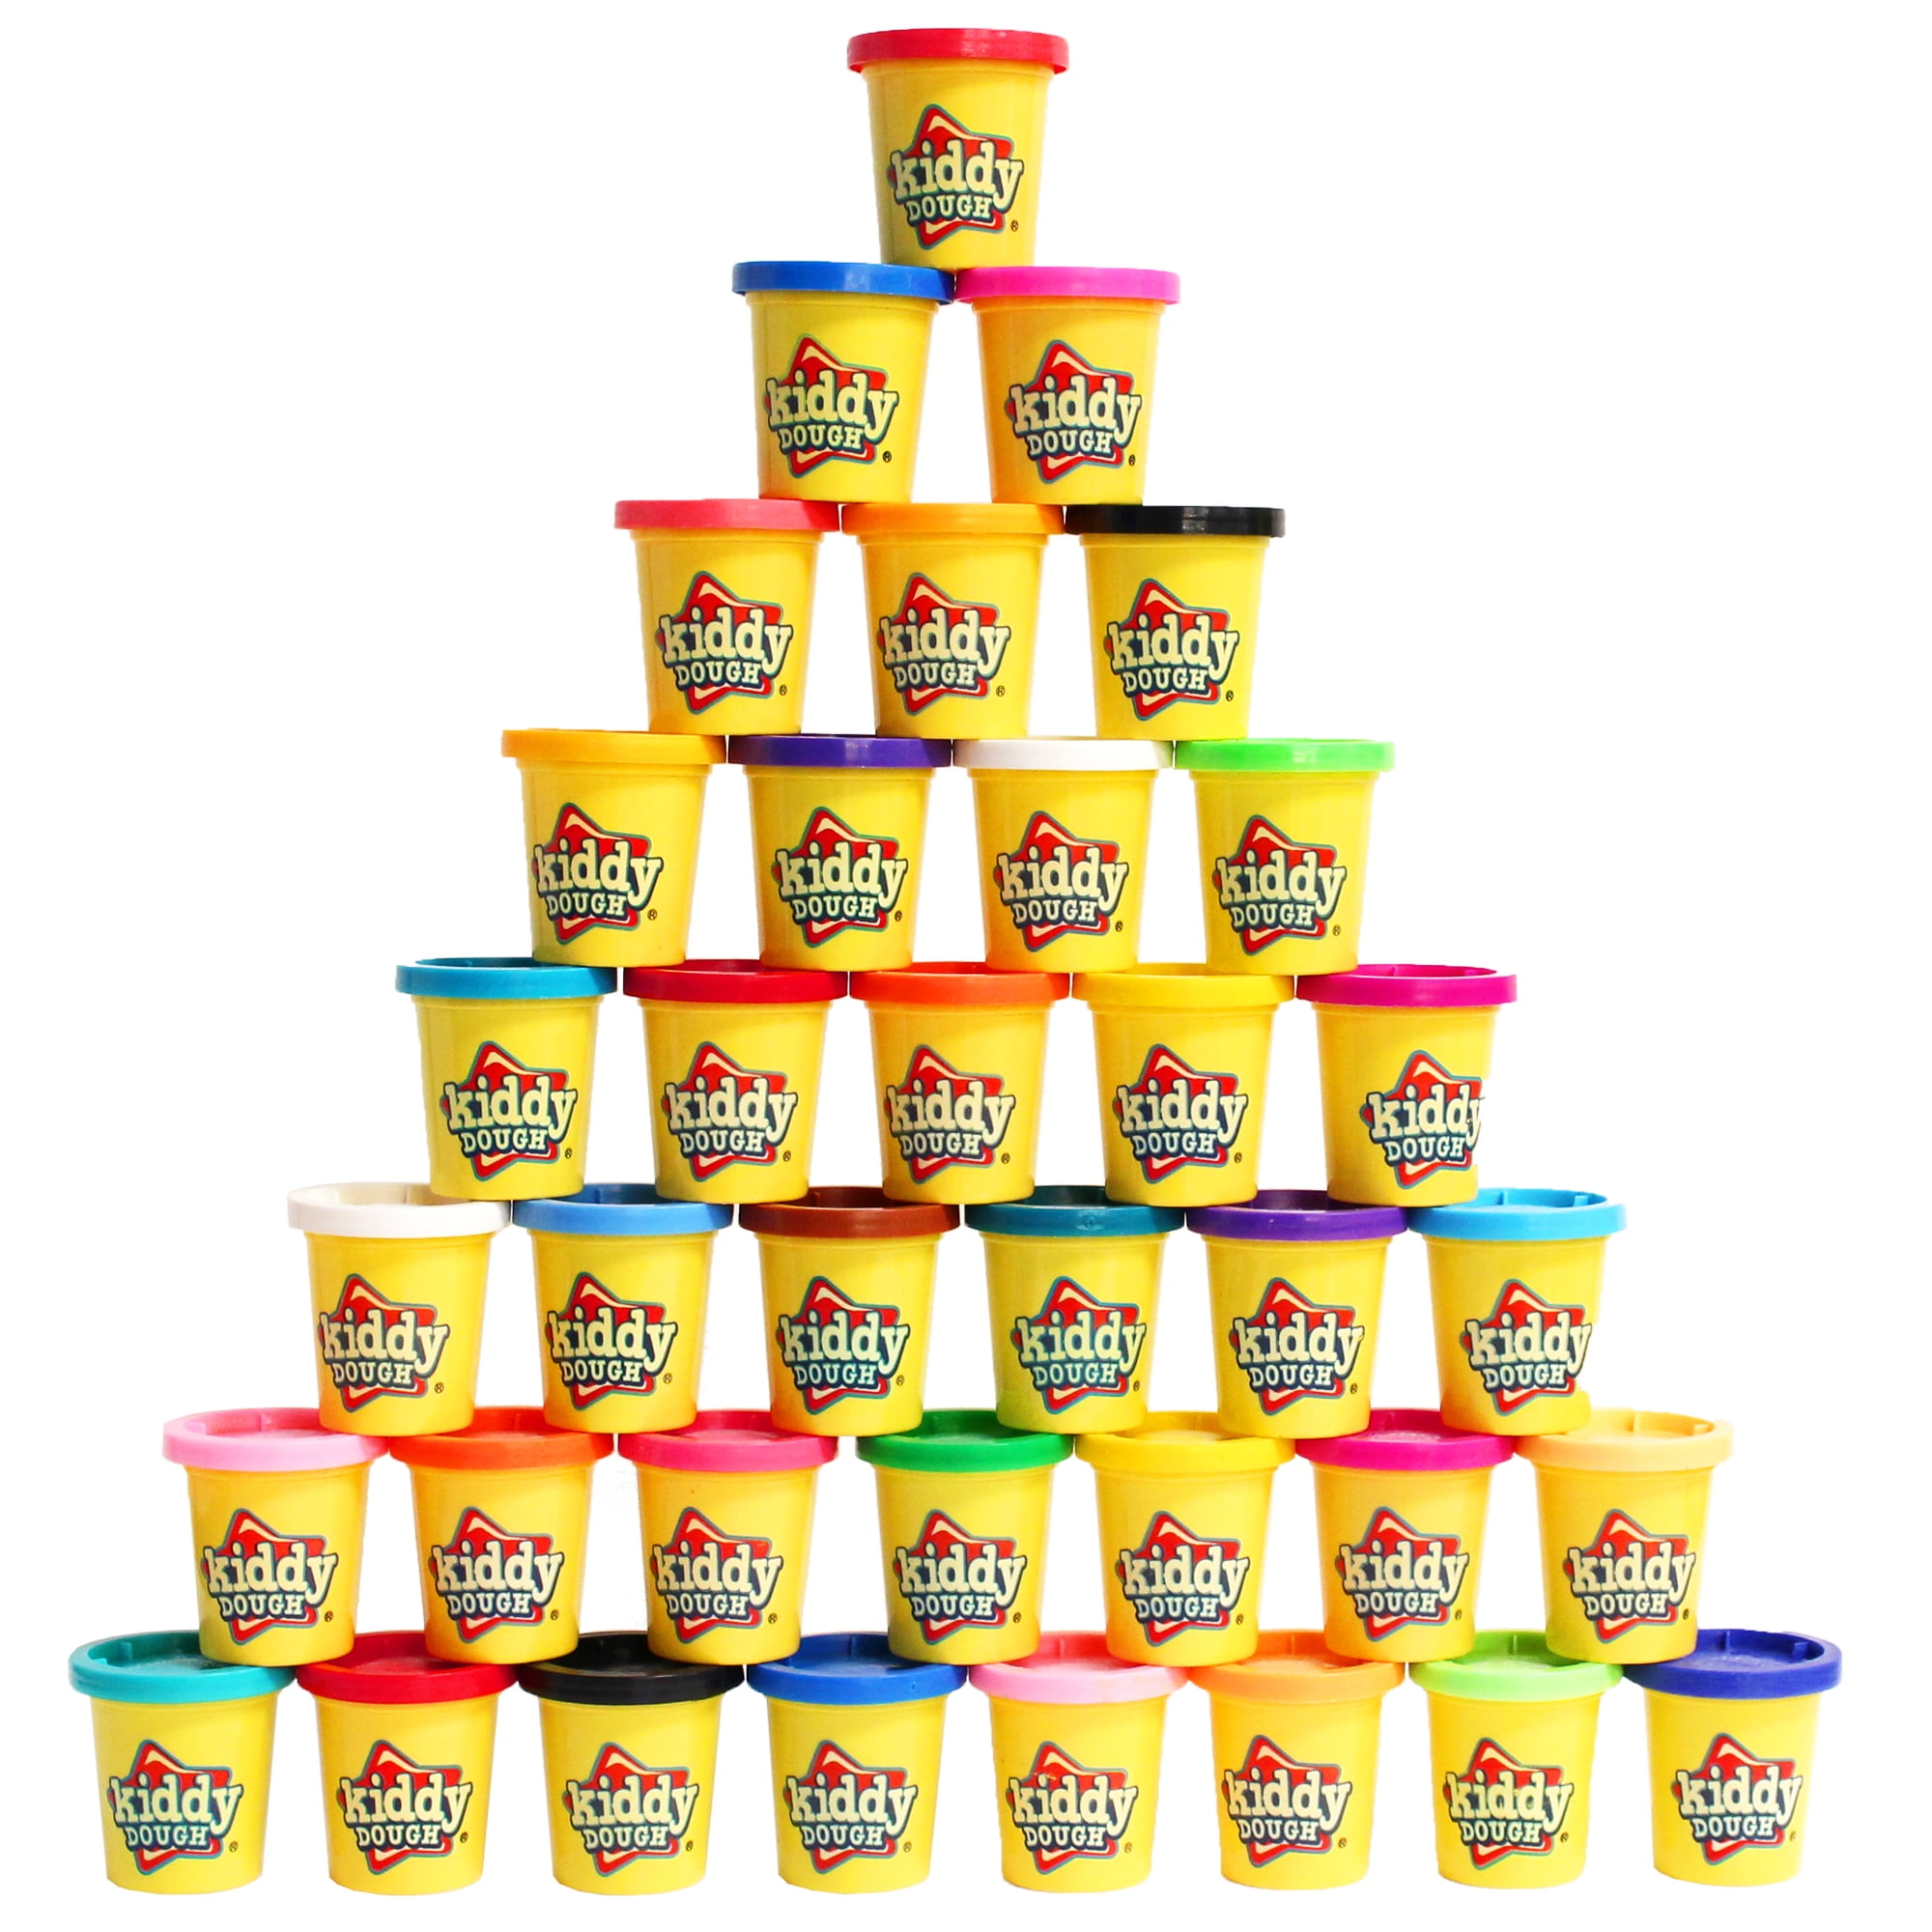 Play-Doh Modeling Compound Bulk 36-Pack for Kids 2 Years and Up, 3-Ounce  Cans, Non-Toxic - Play-Doh